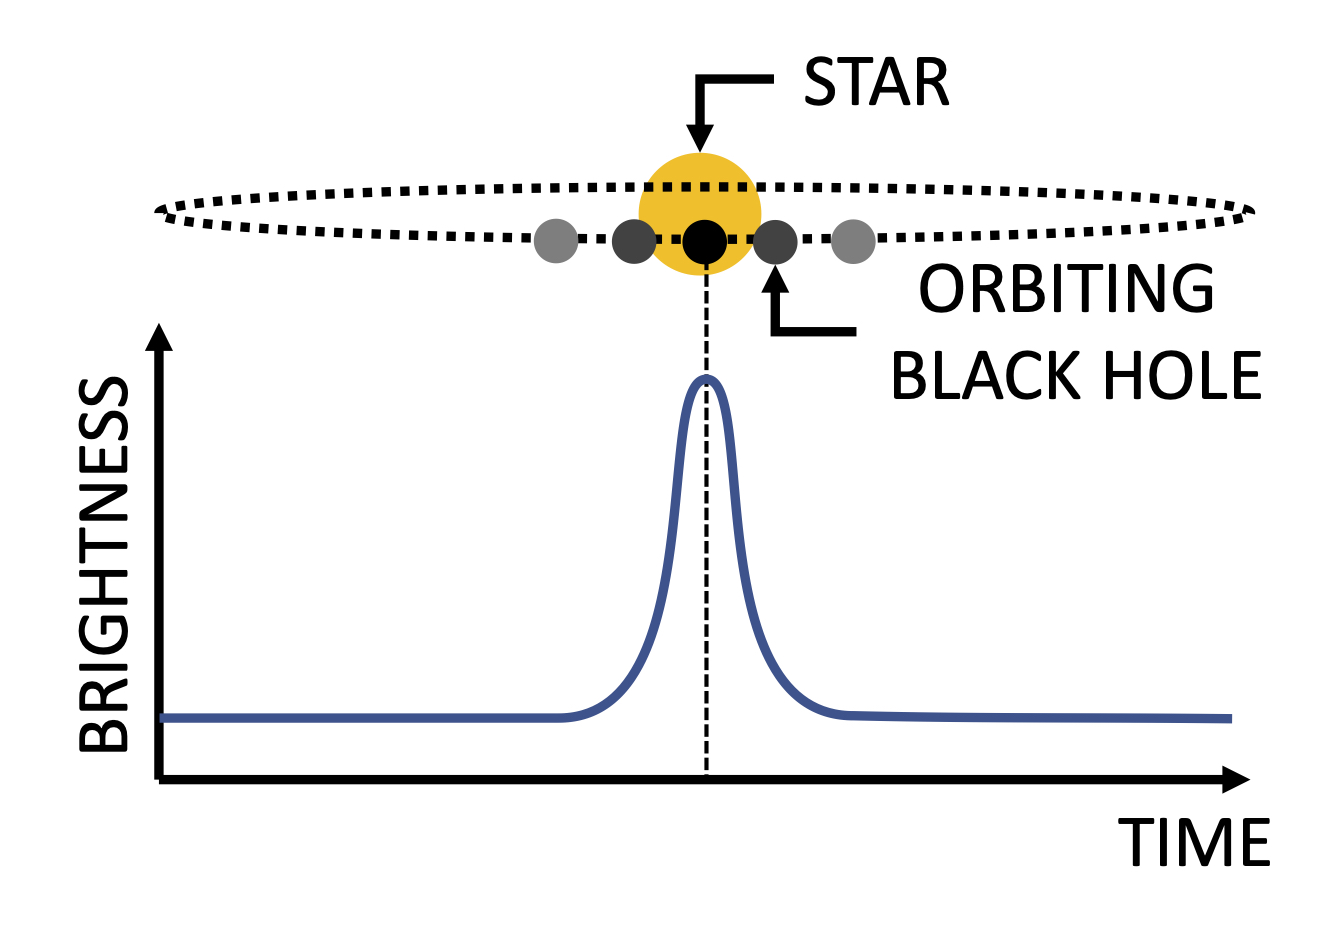 A schematic image of the self-lensing process